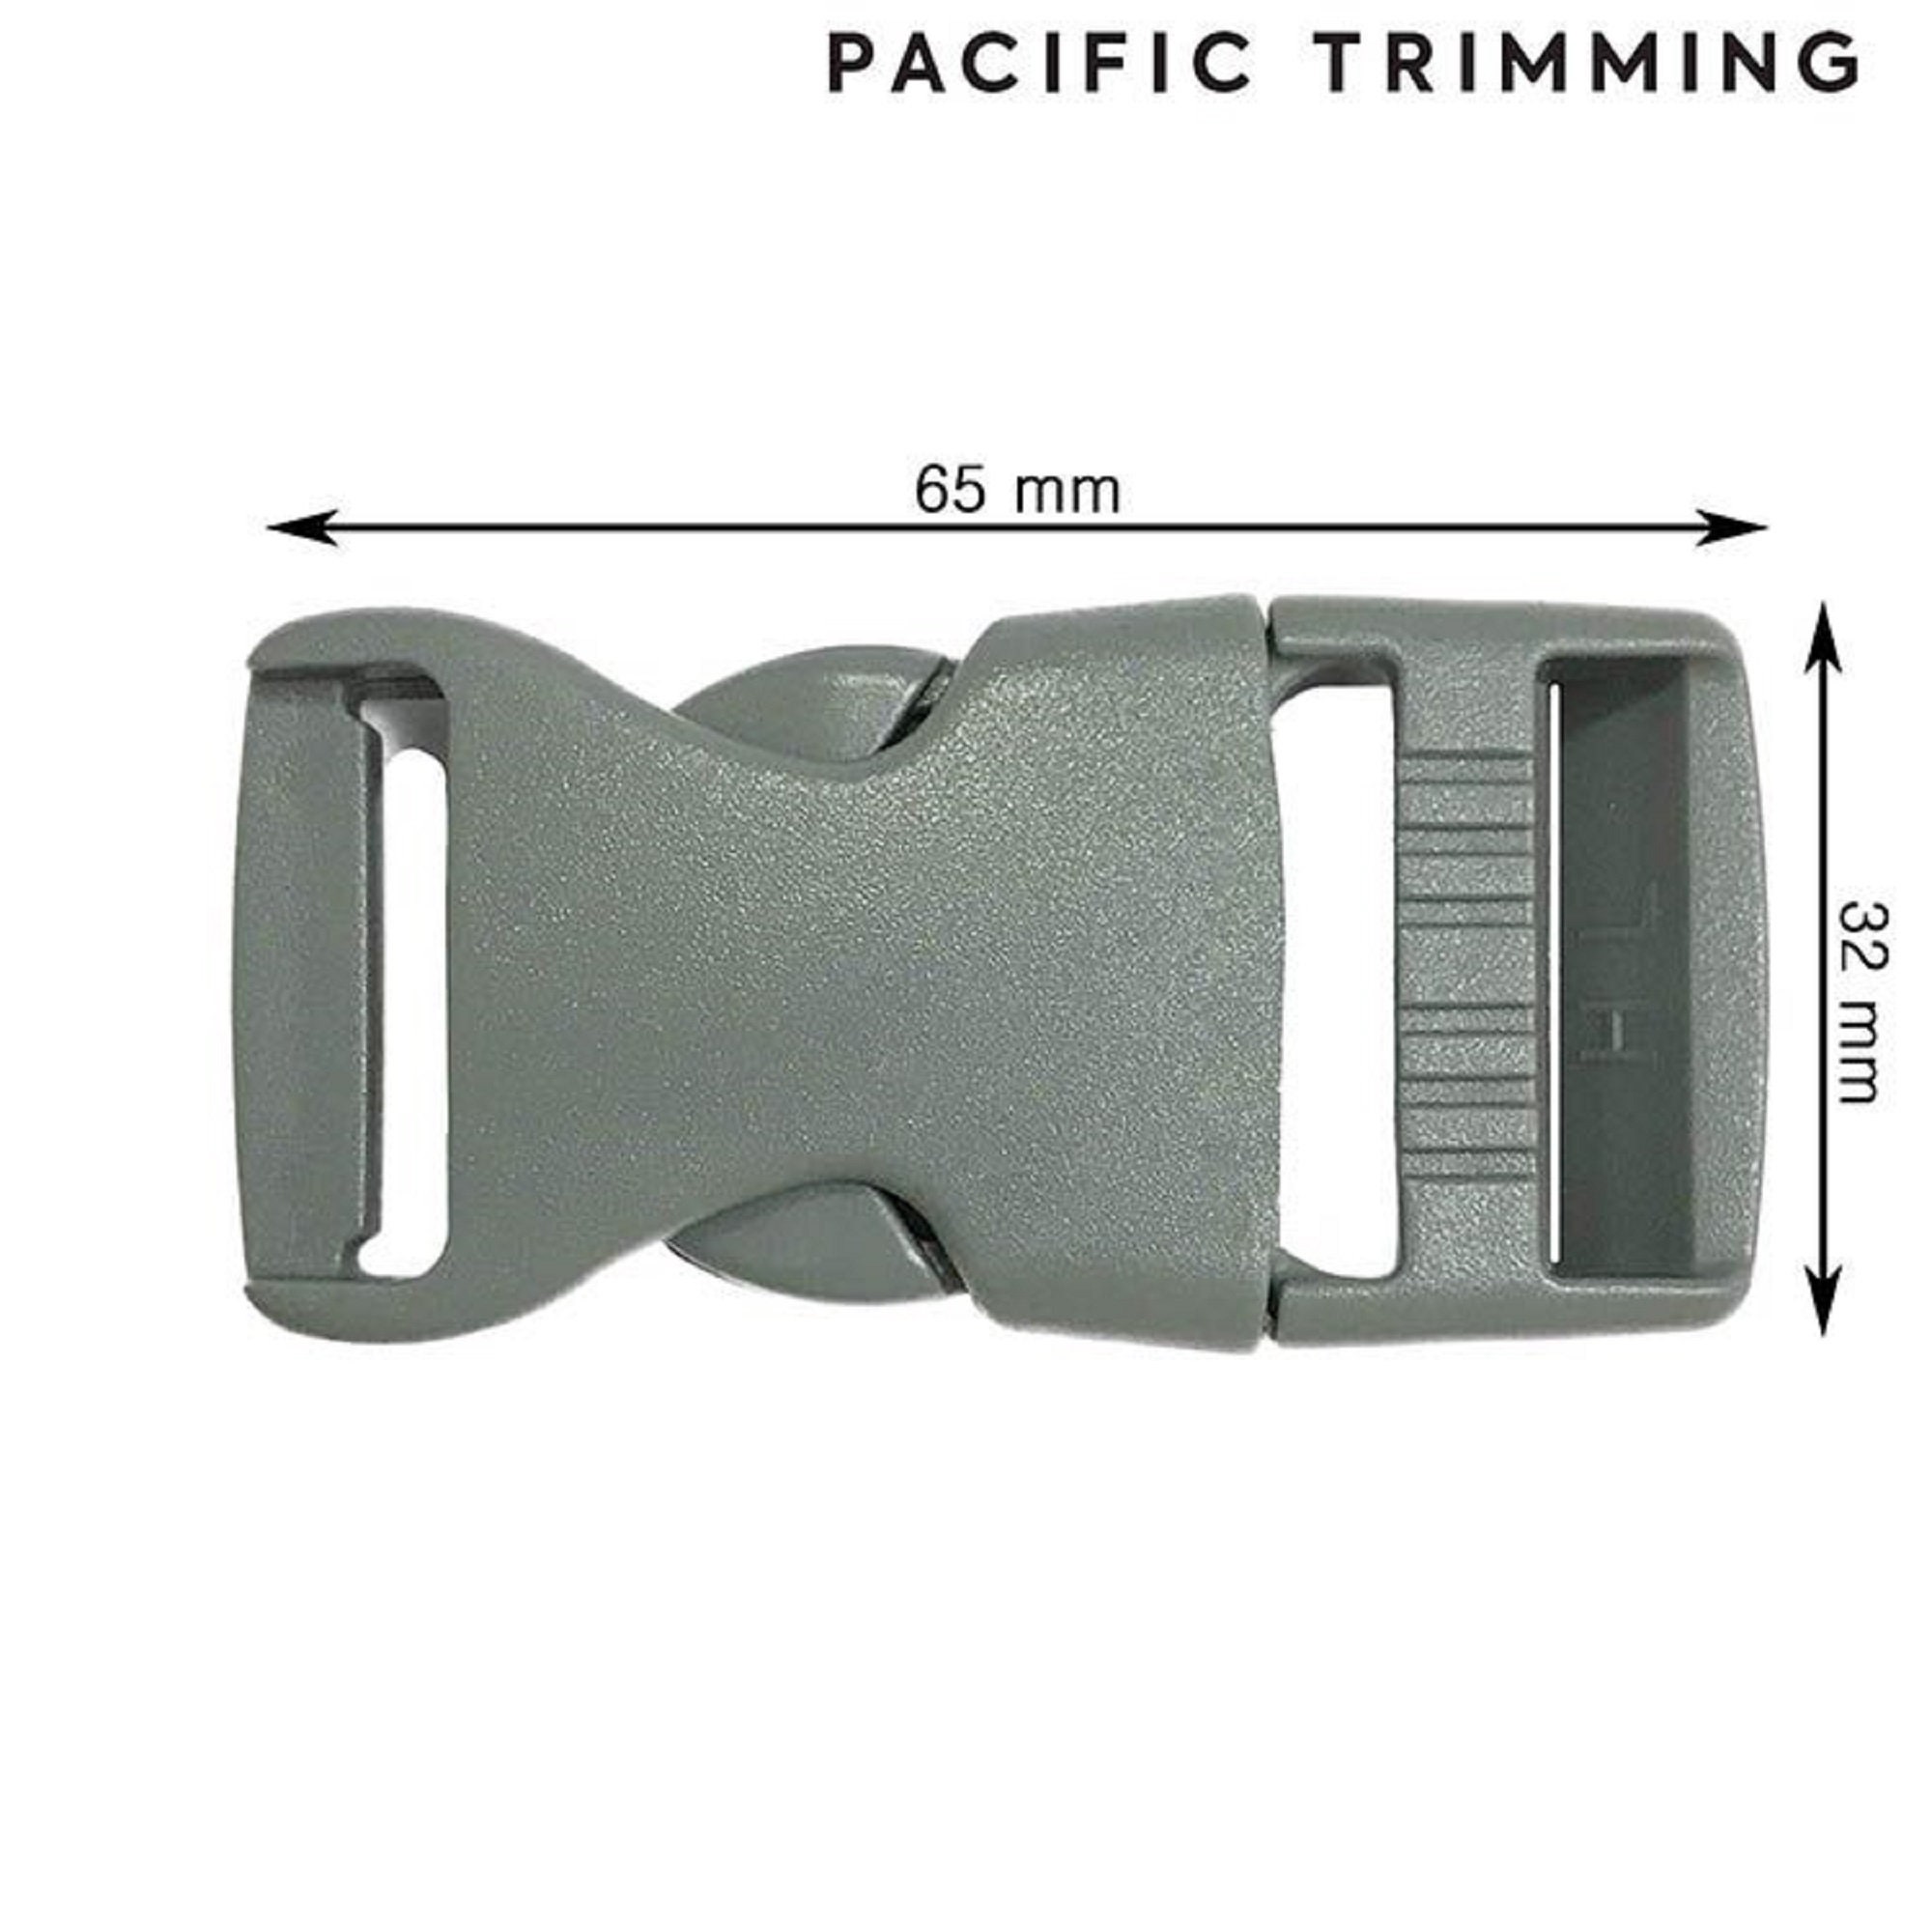 Buy 5/8 Inch Grey Contoured Side Release Plastic Buckle Closeout Online